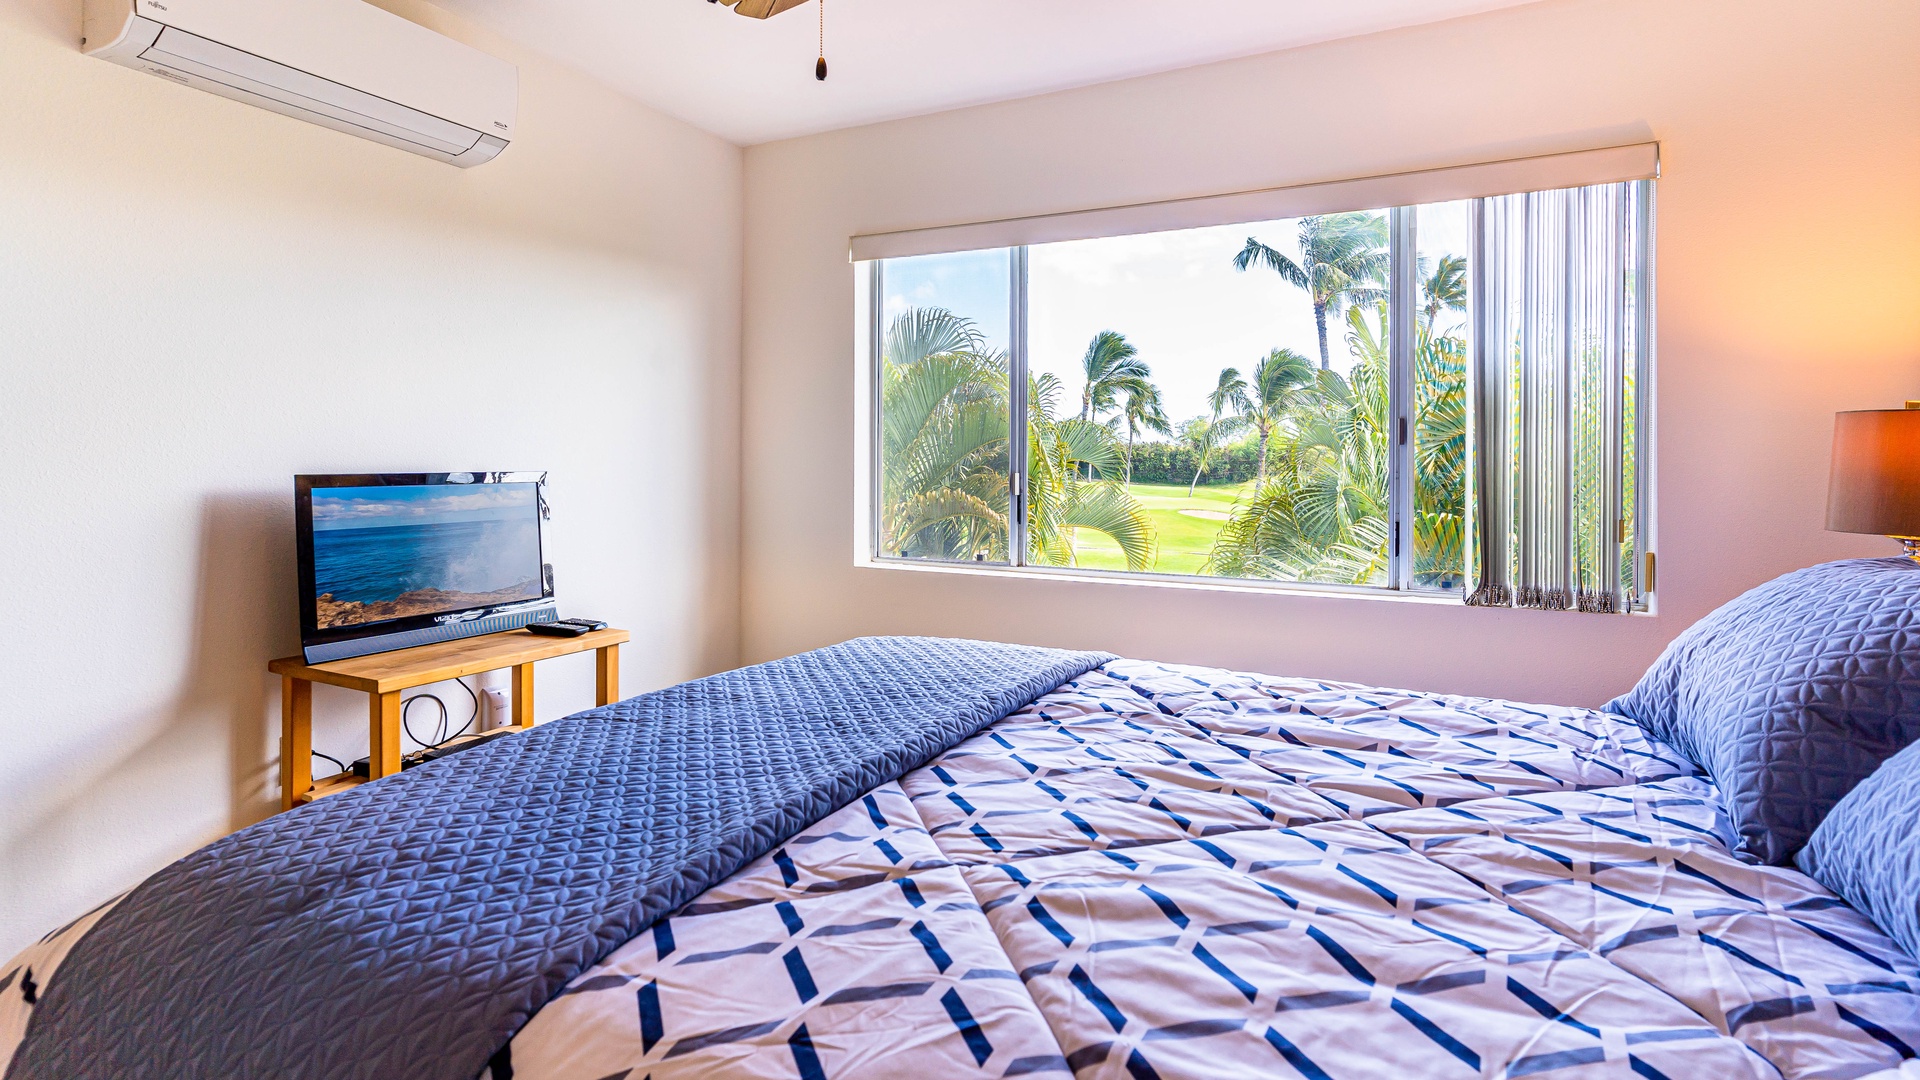 Kapolei Vacation Rentals, Fairways at Ko Olina 20G - The primary guest bedroom with a television and scenic views.